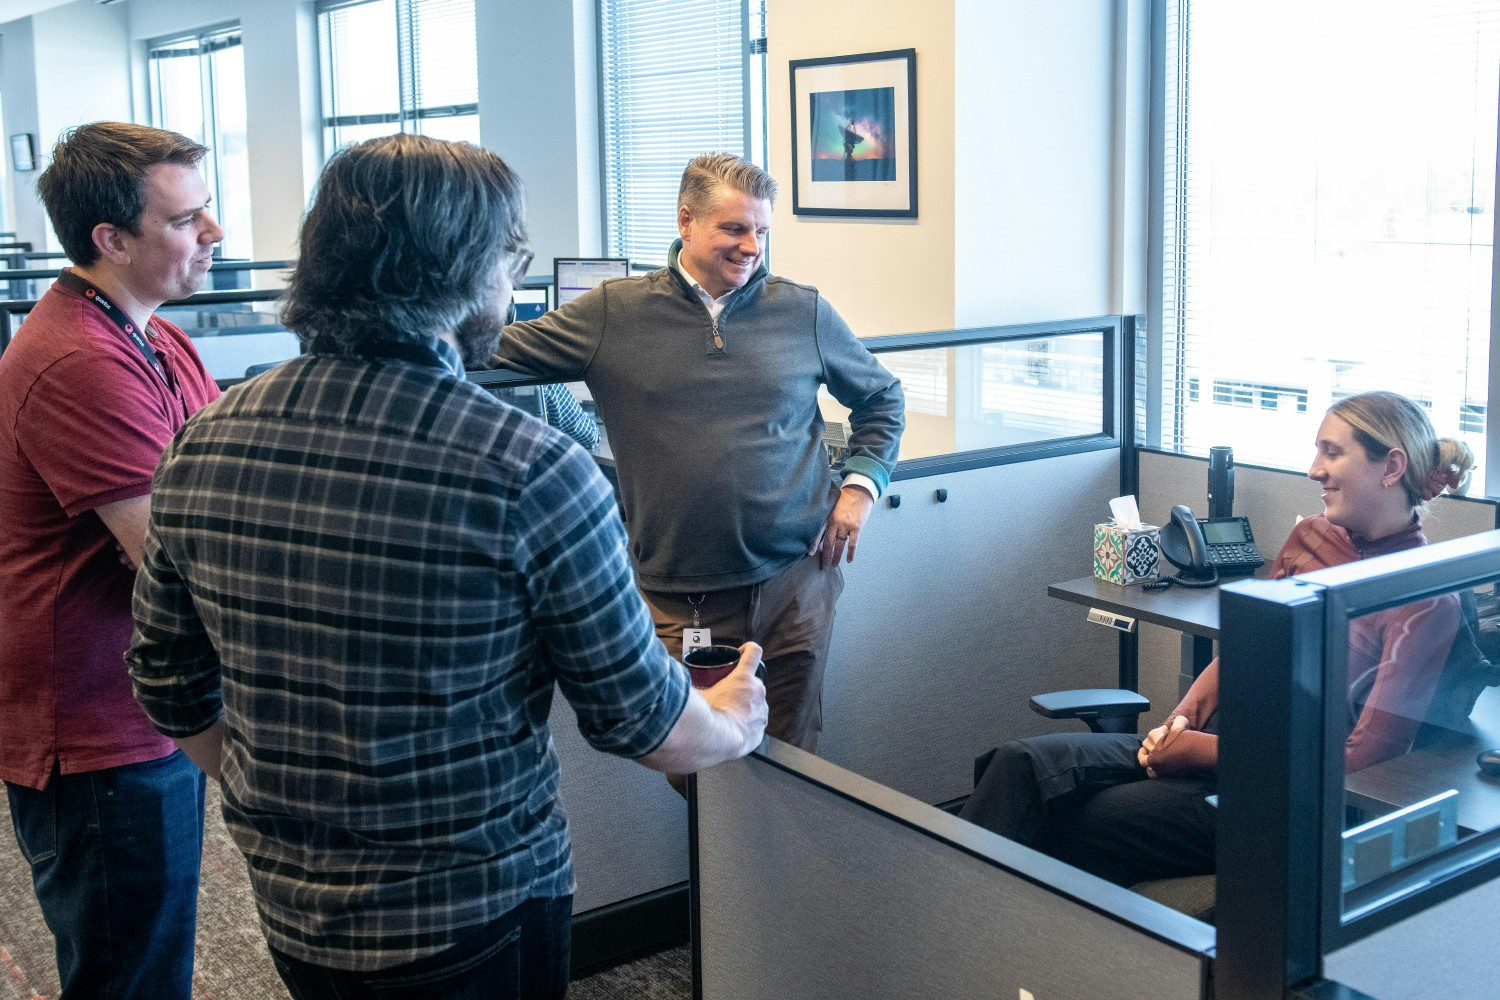 Quartus CEO John Williams visits and chats with employees in the Herndon, VA office.